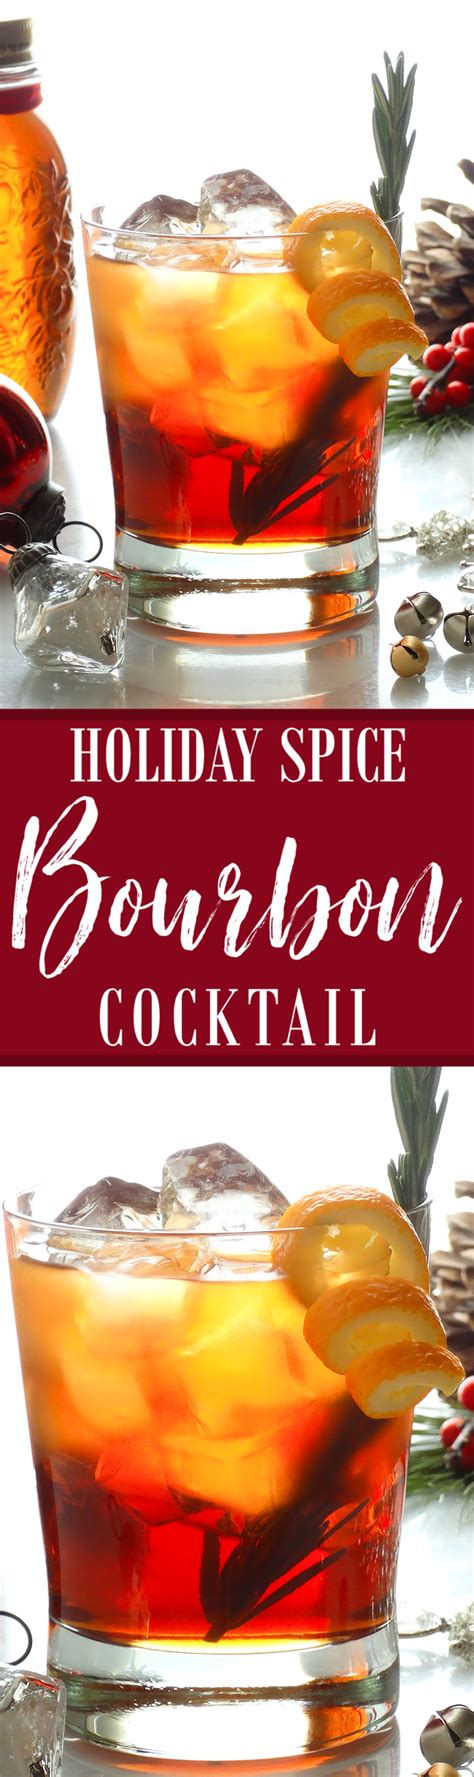 Add the bourbon, cinnamon whiskey, cointreau, amaretto, lemon juice, and cranberry juice. Bourbon Christmas Cocktails - Naughty but Nice Christmas Cocktail - delicious holiday ...